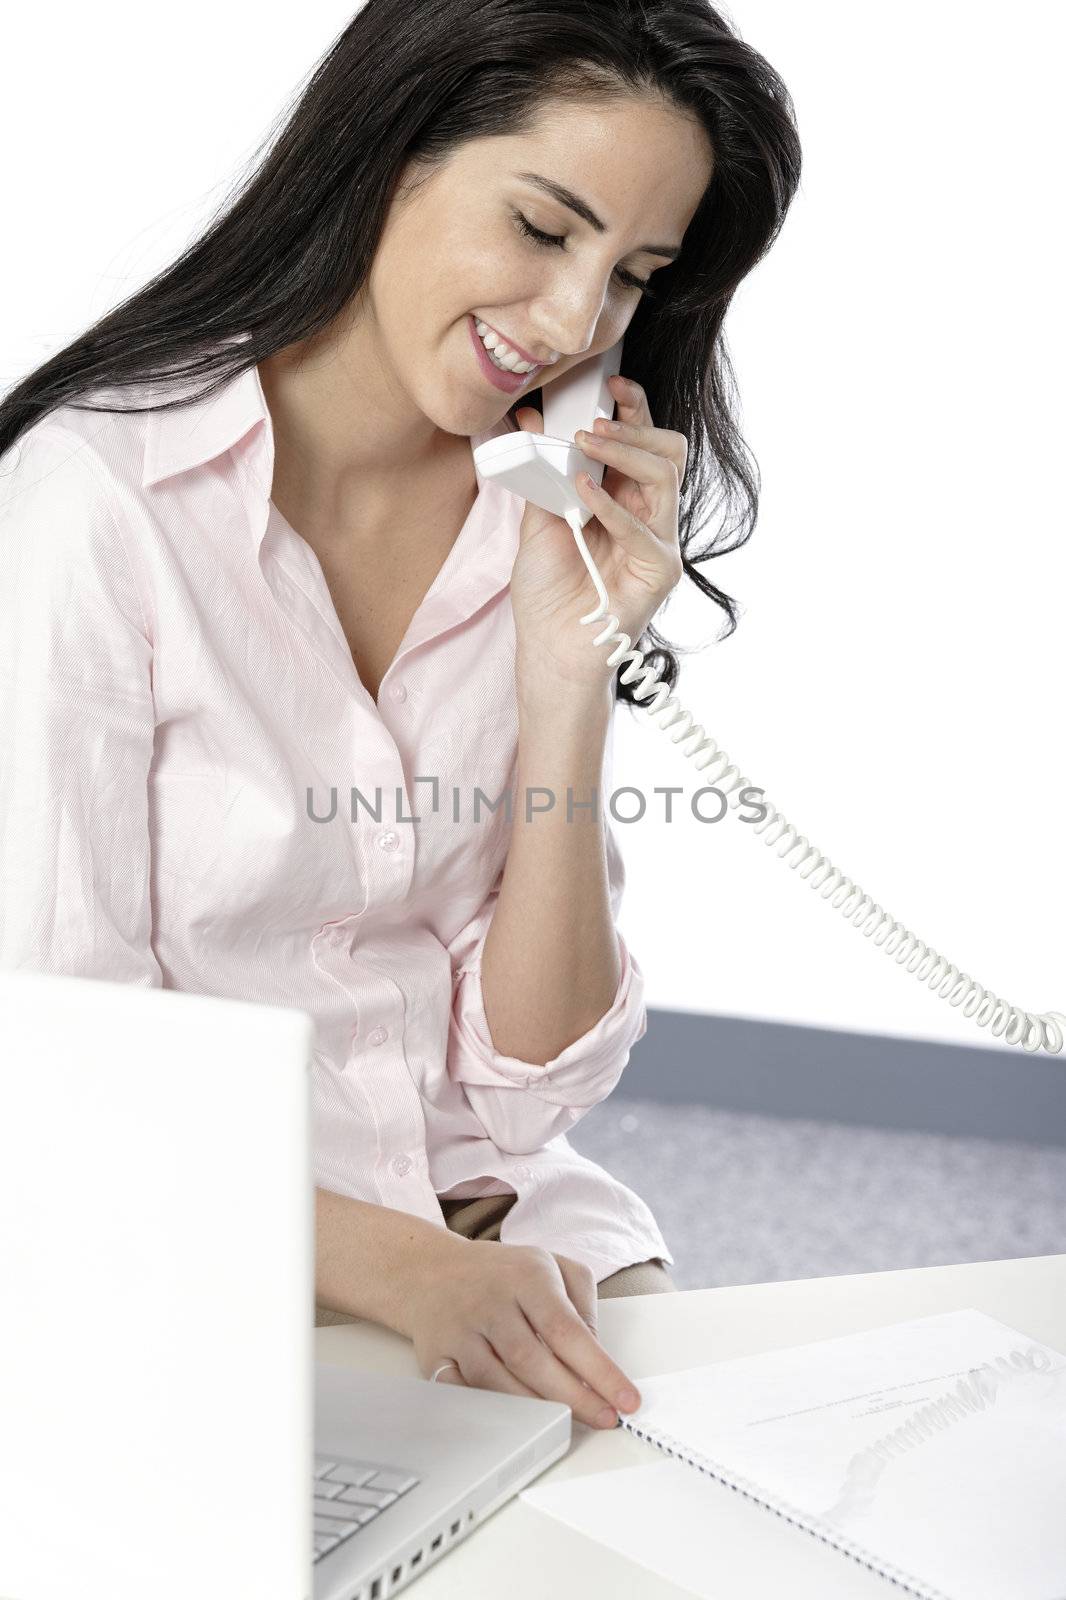 Beautiful young woman on a reception desk talking on the phone